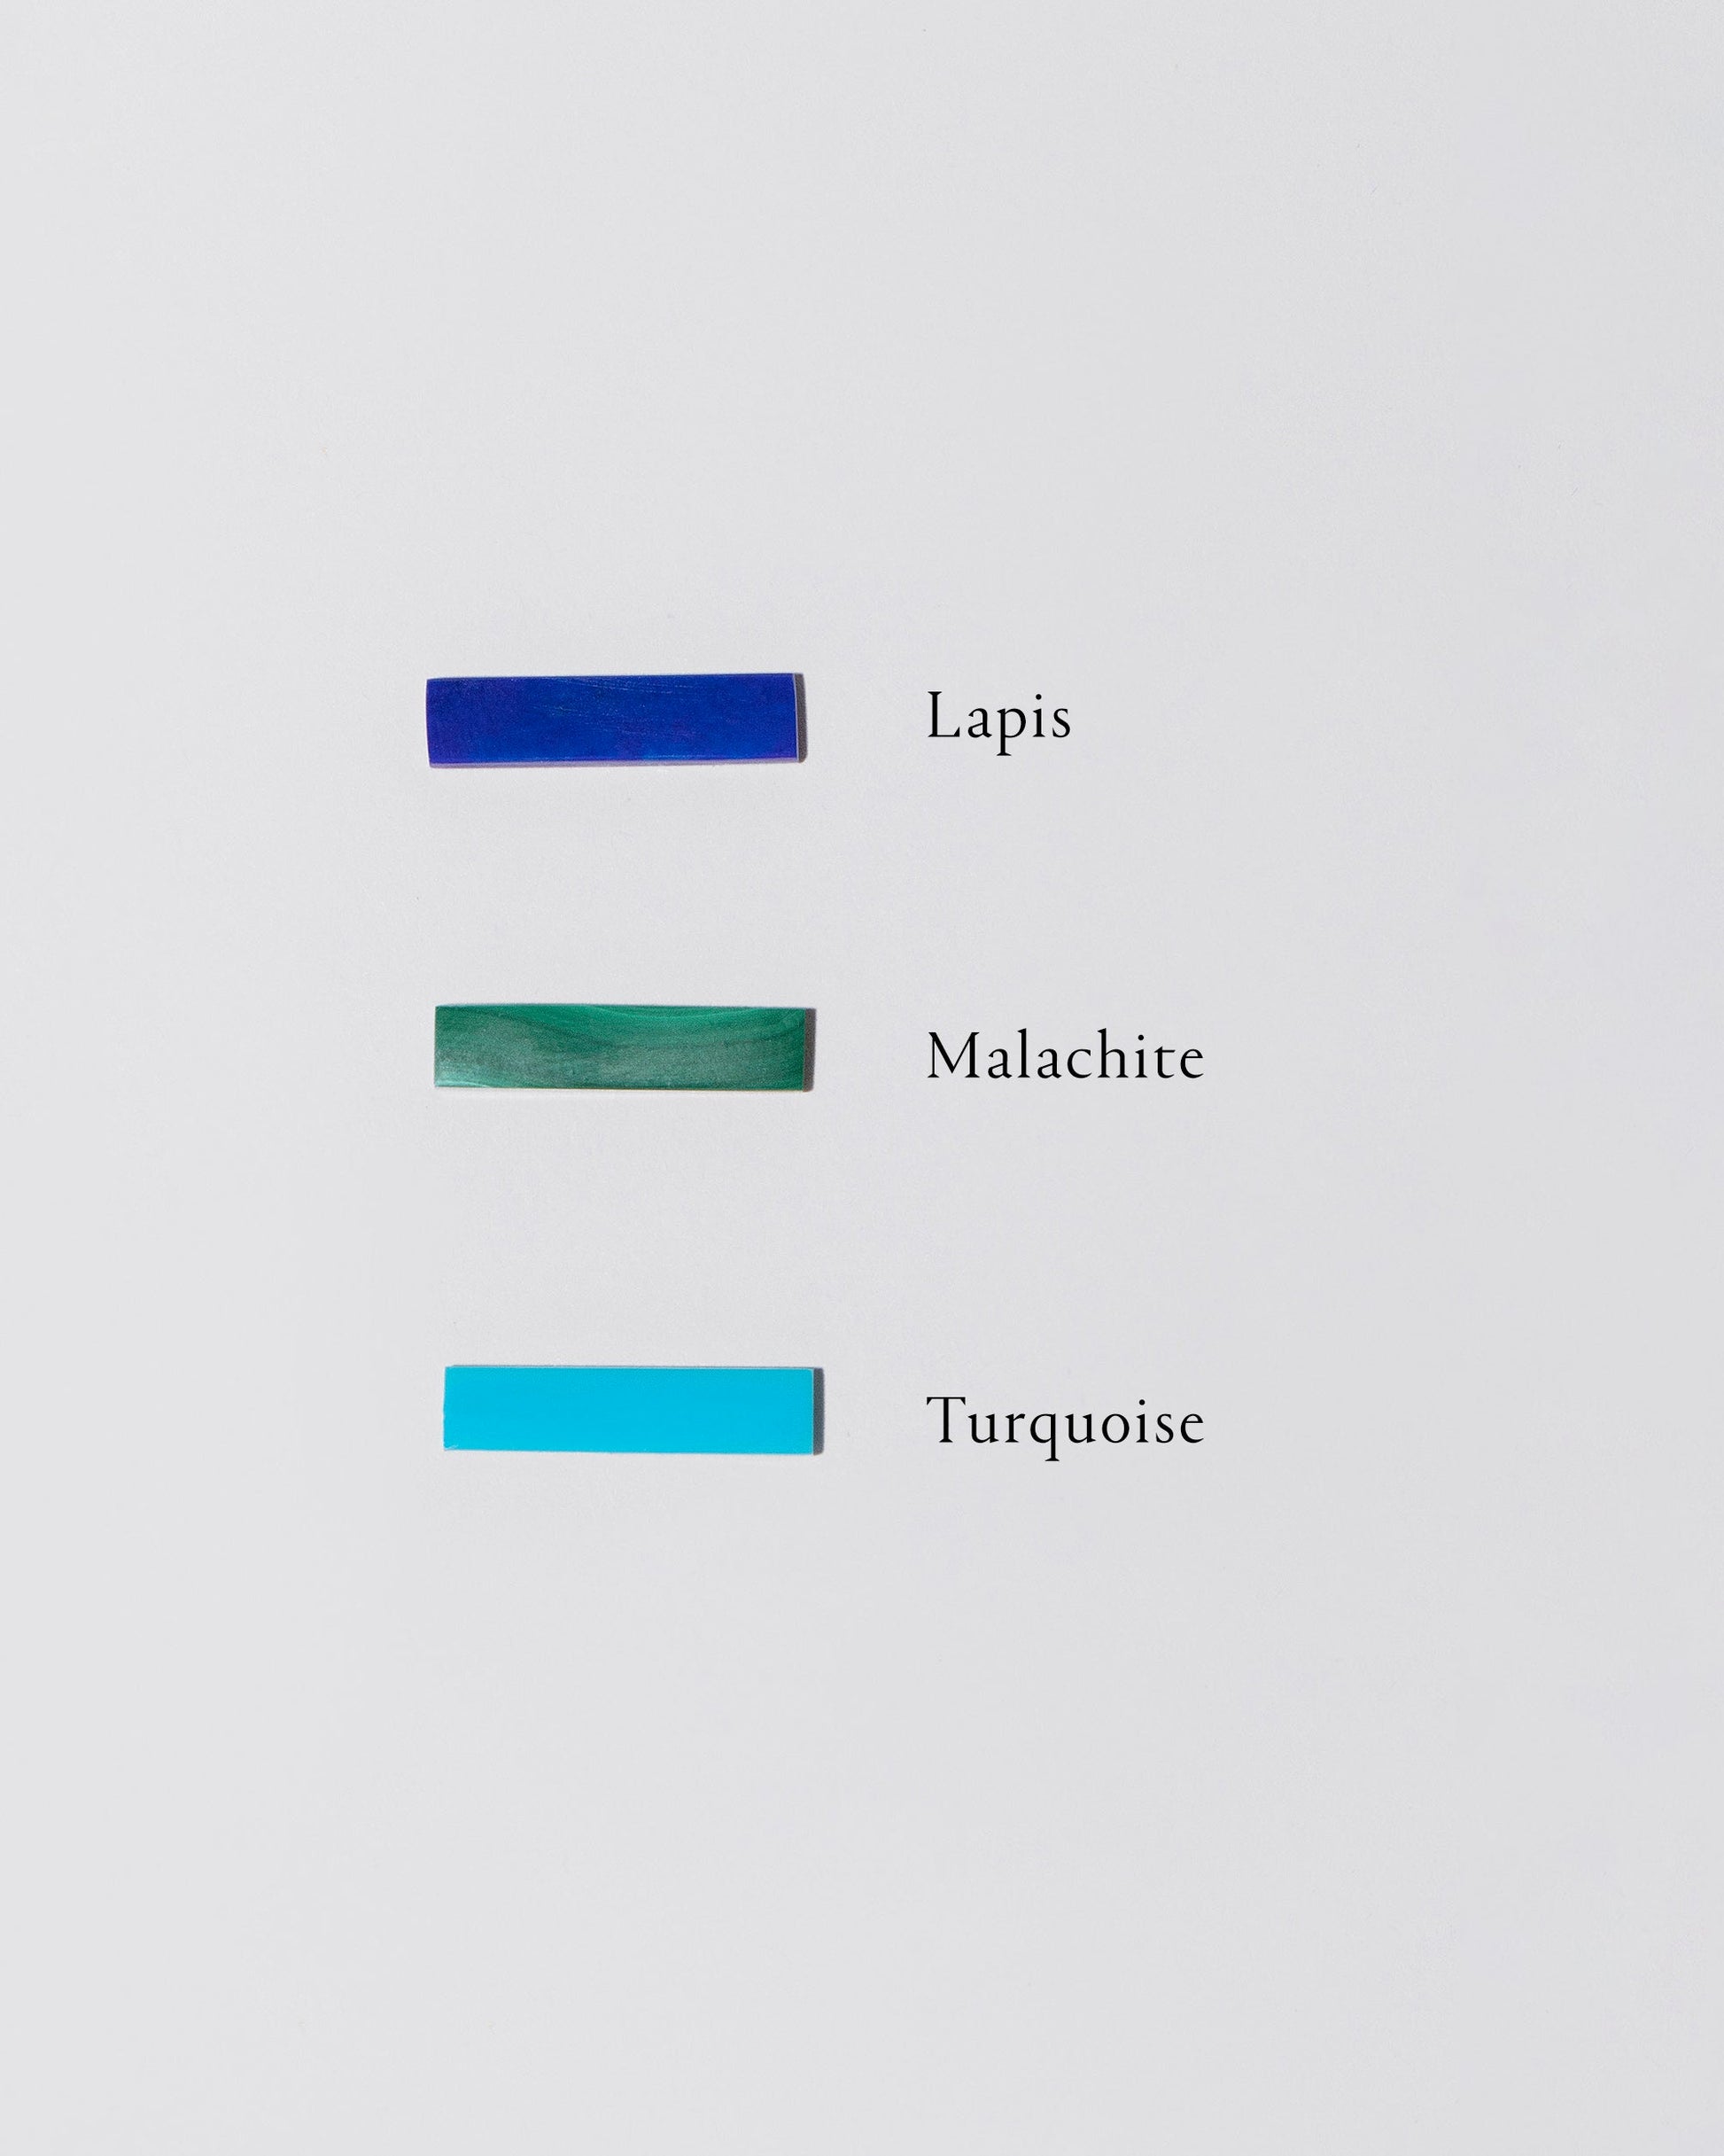 Specimens of lapis, malachite and turquoise on light colored background.